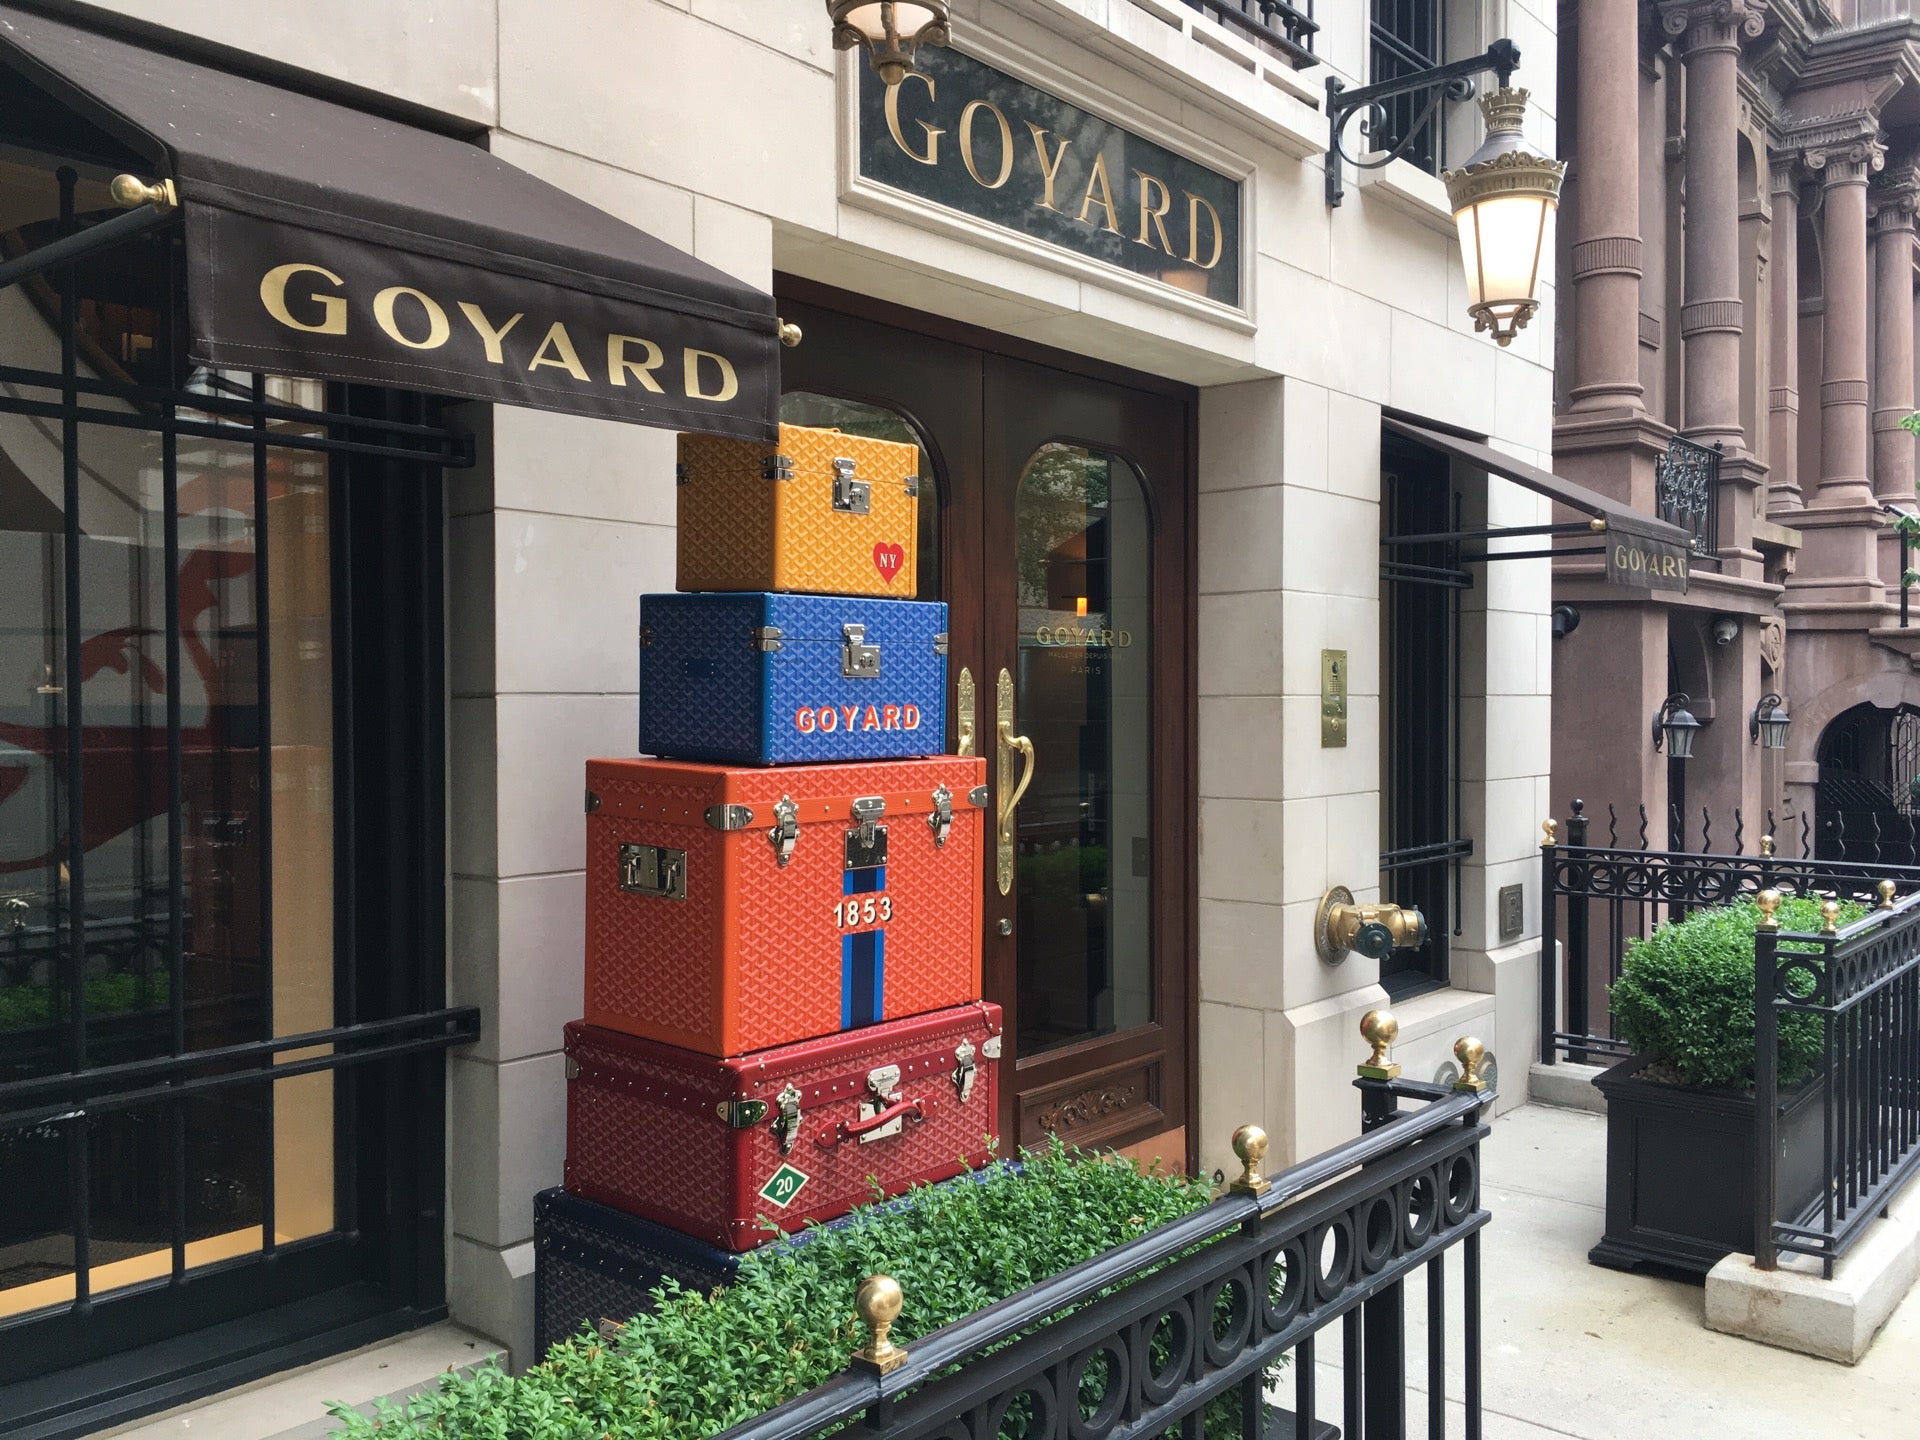 Maison Goyard - Leather Goods Store in New York